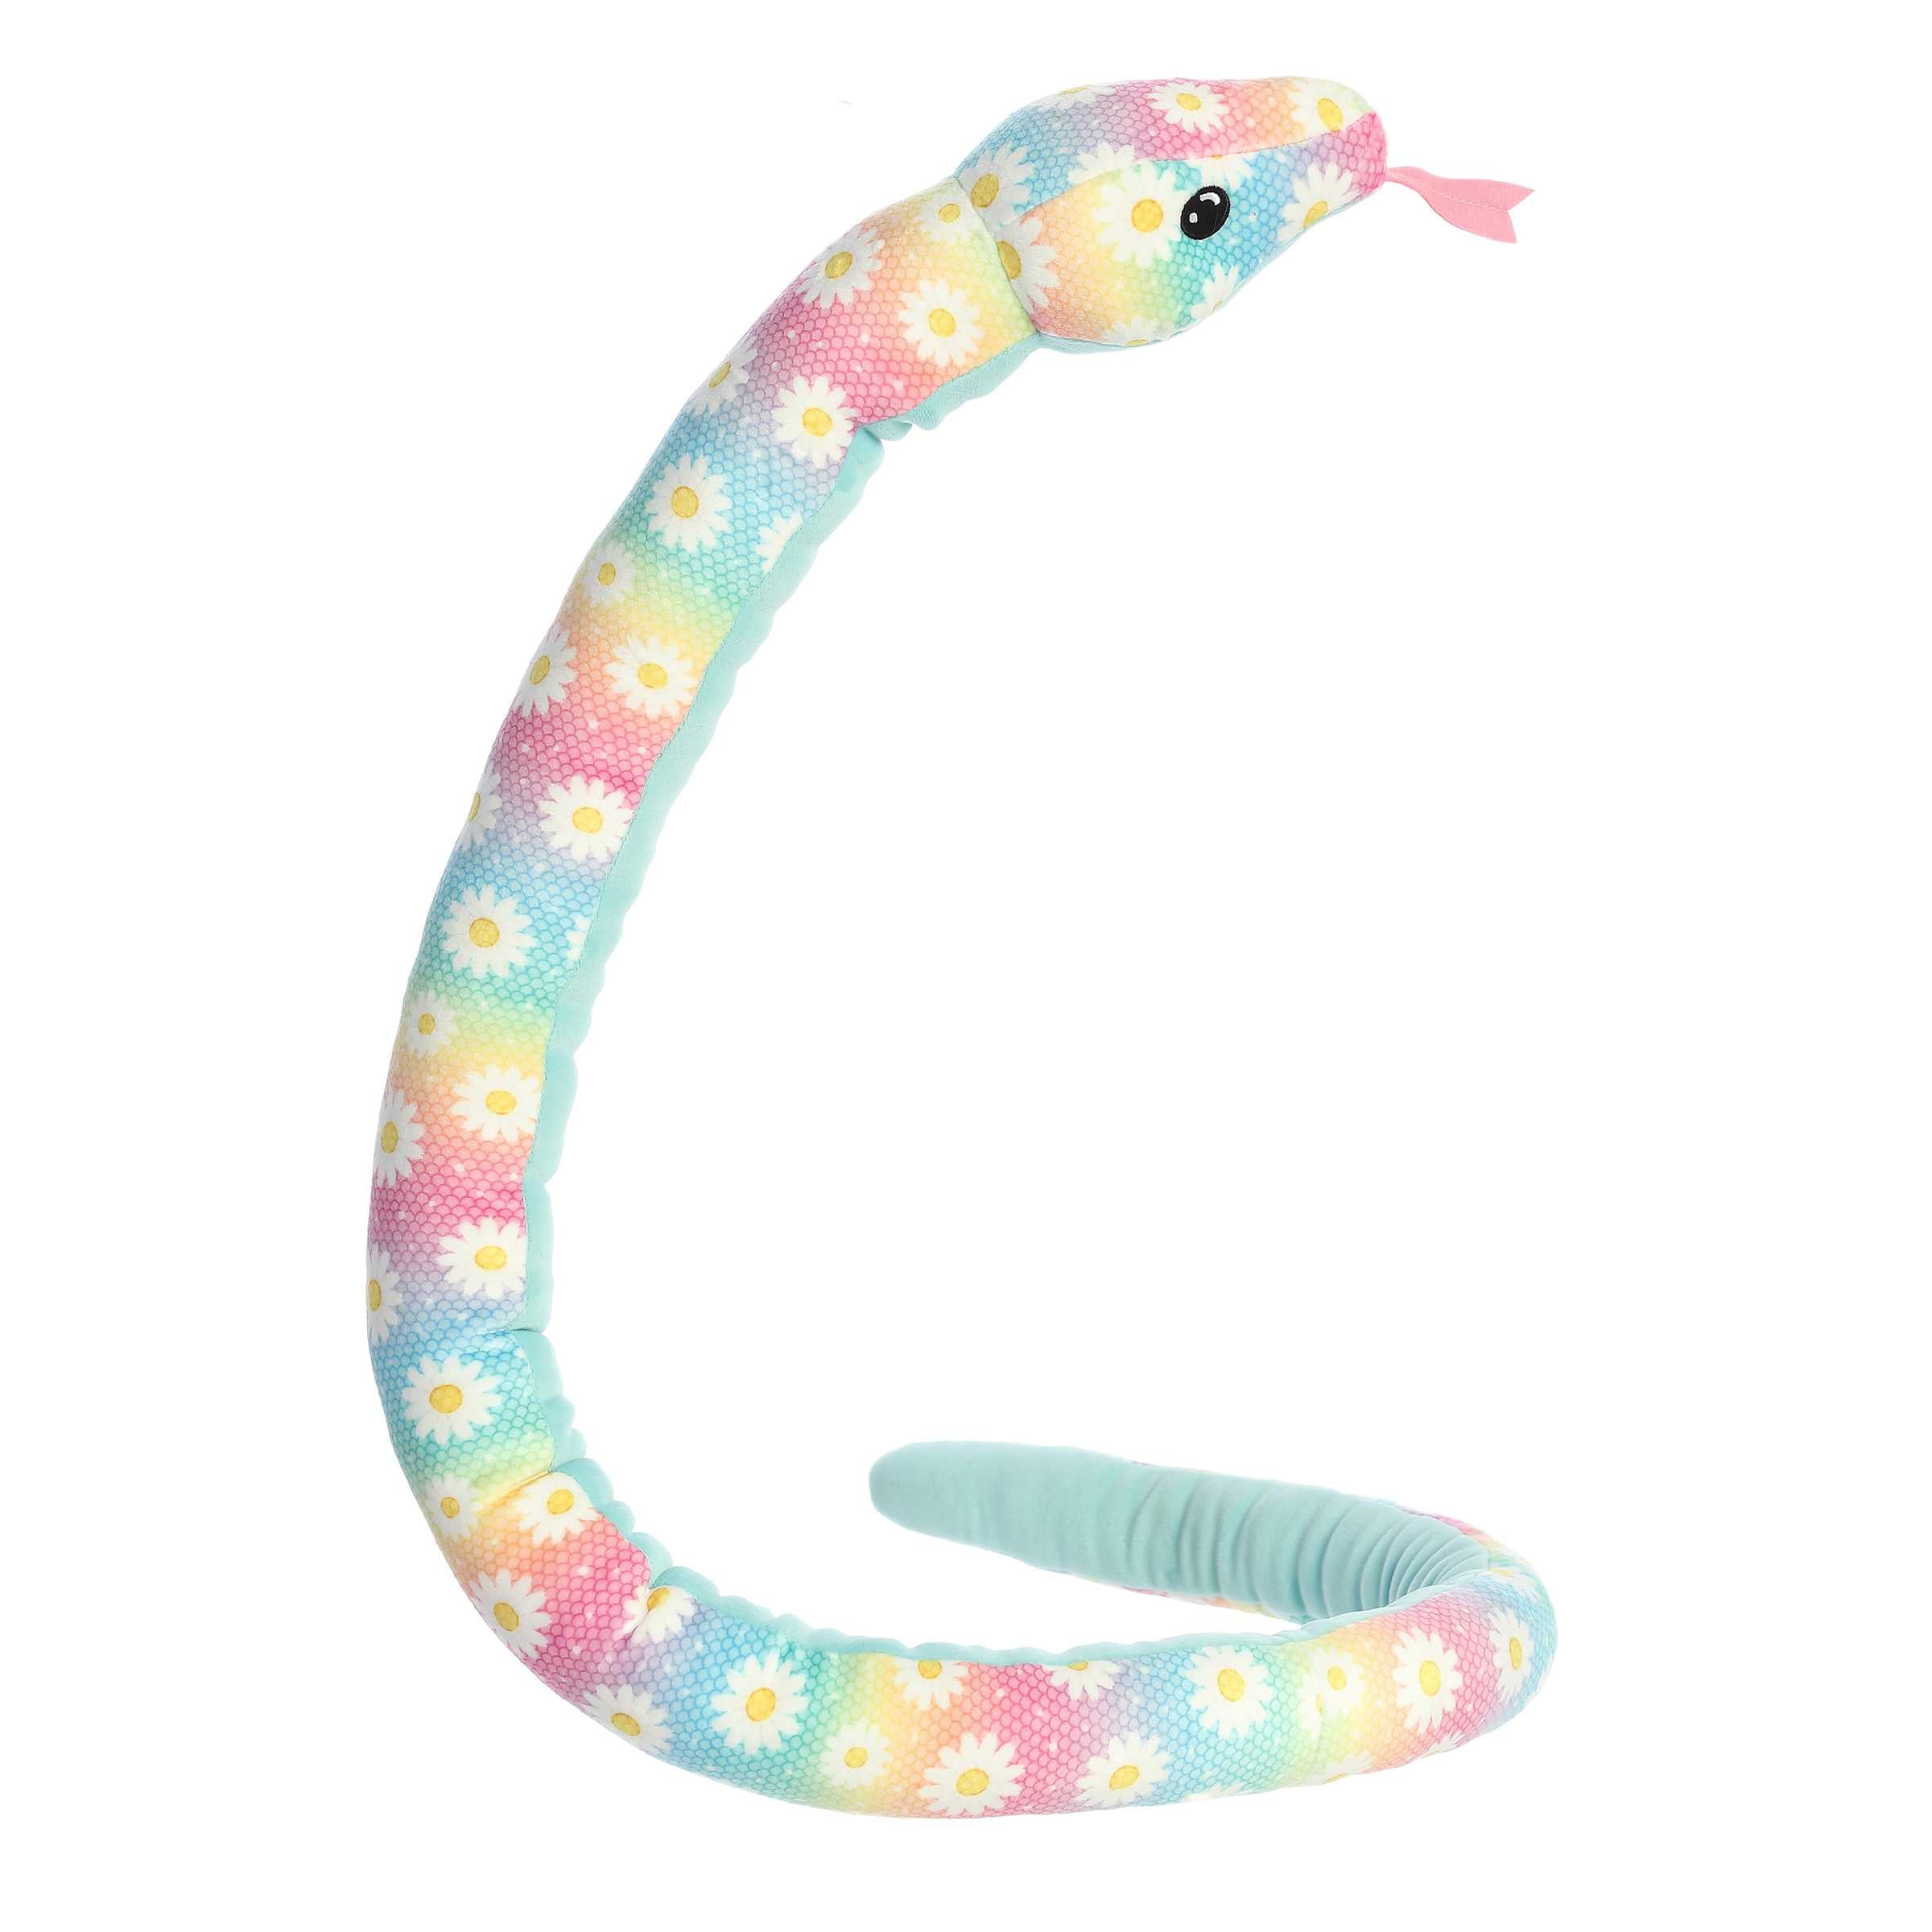 Colorful rainbow-scaled snake plush, extra squishy with adorable daisy patterns, ready for cuddly adventures.